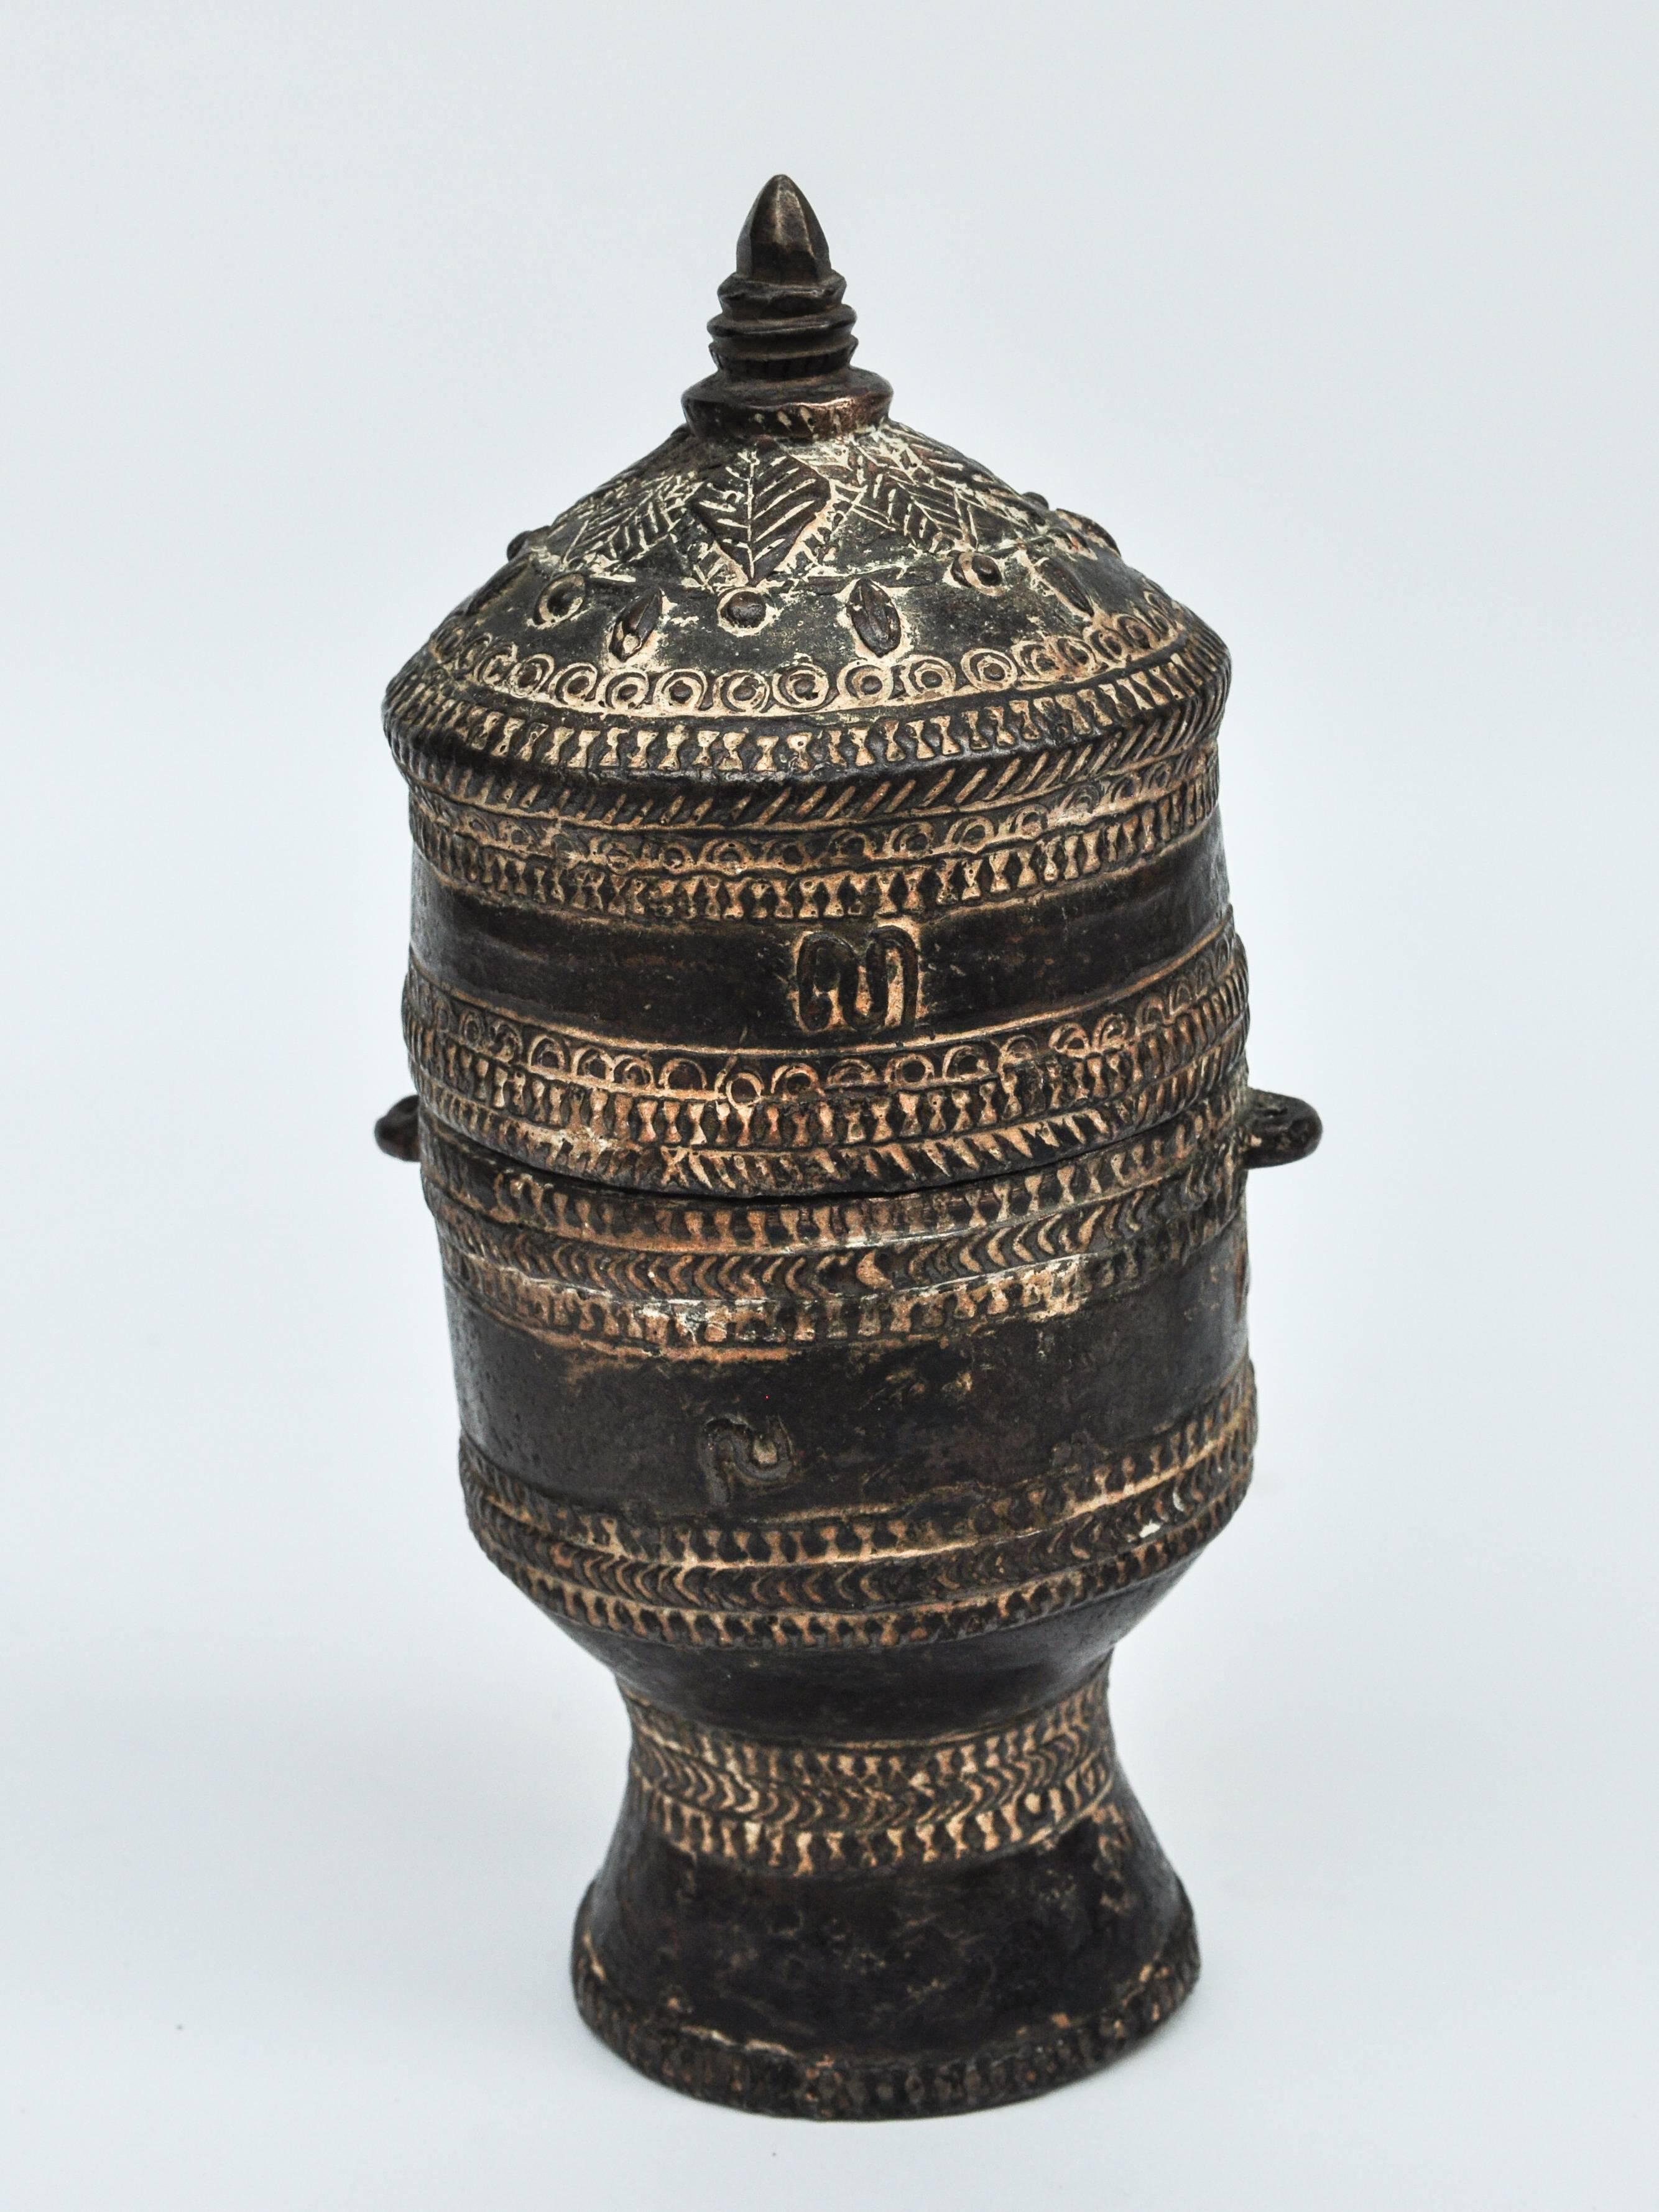 Laotian Bronze Lime Container from Laos, Mid-20th Century